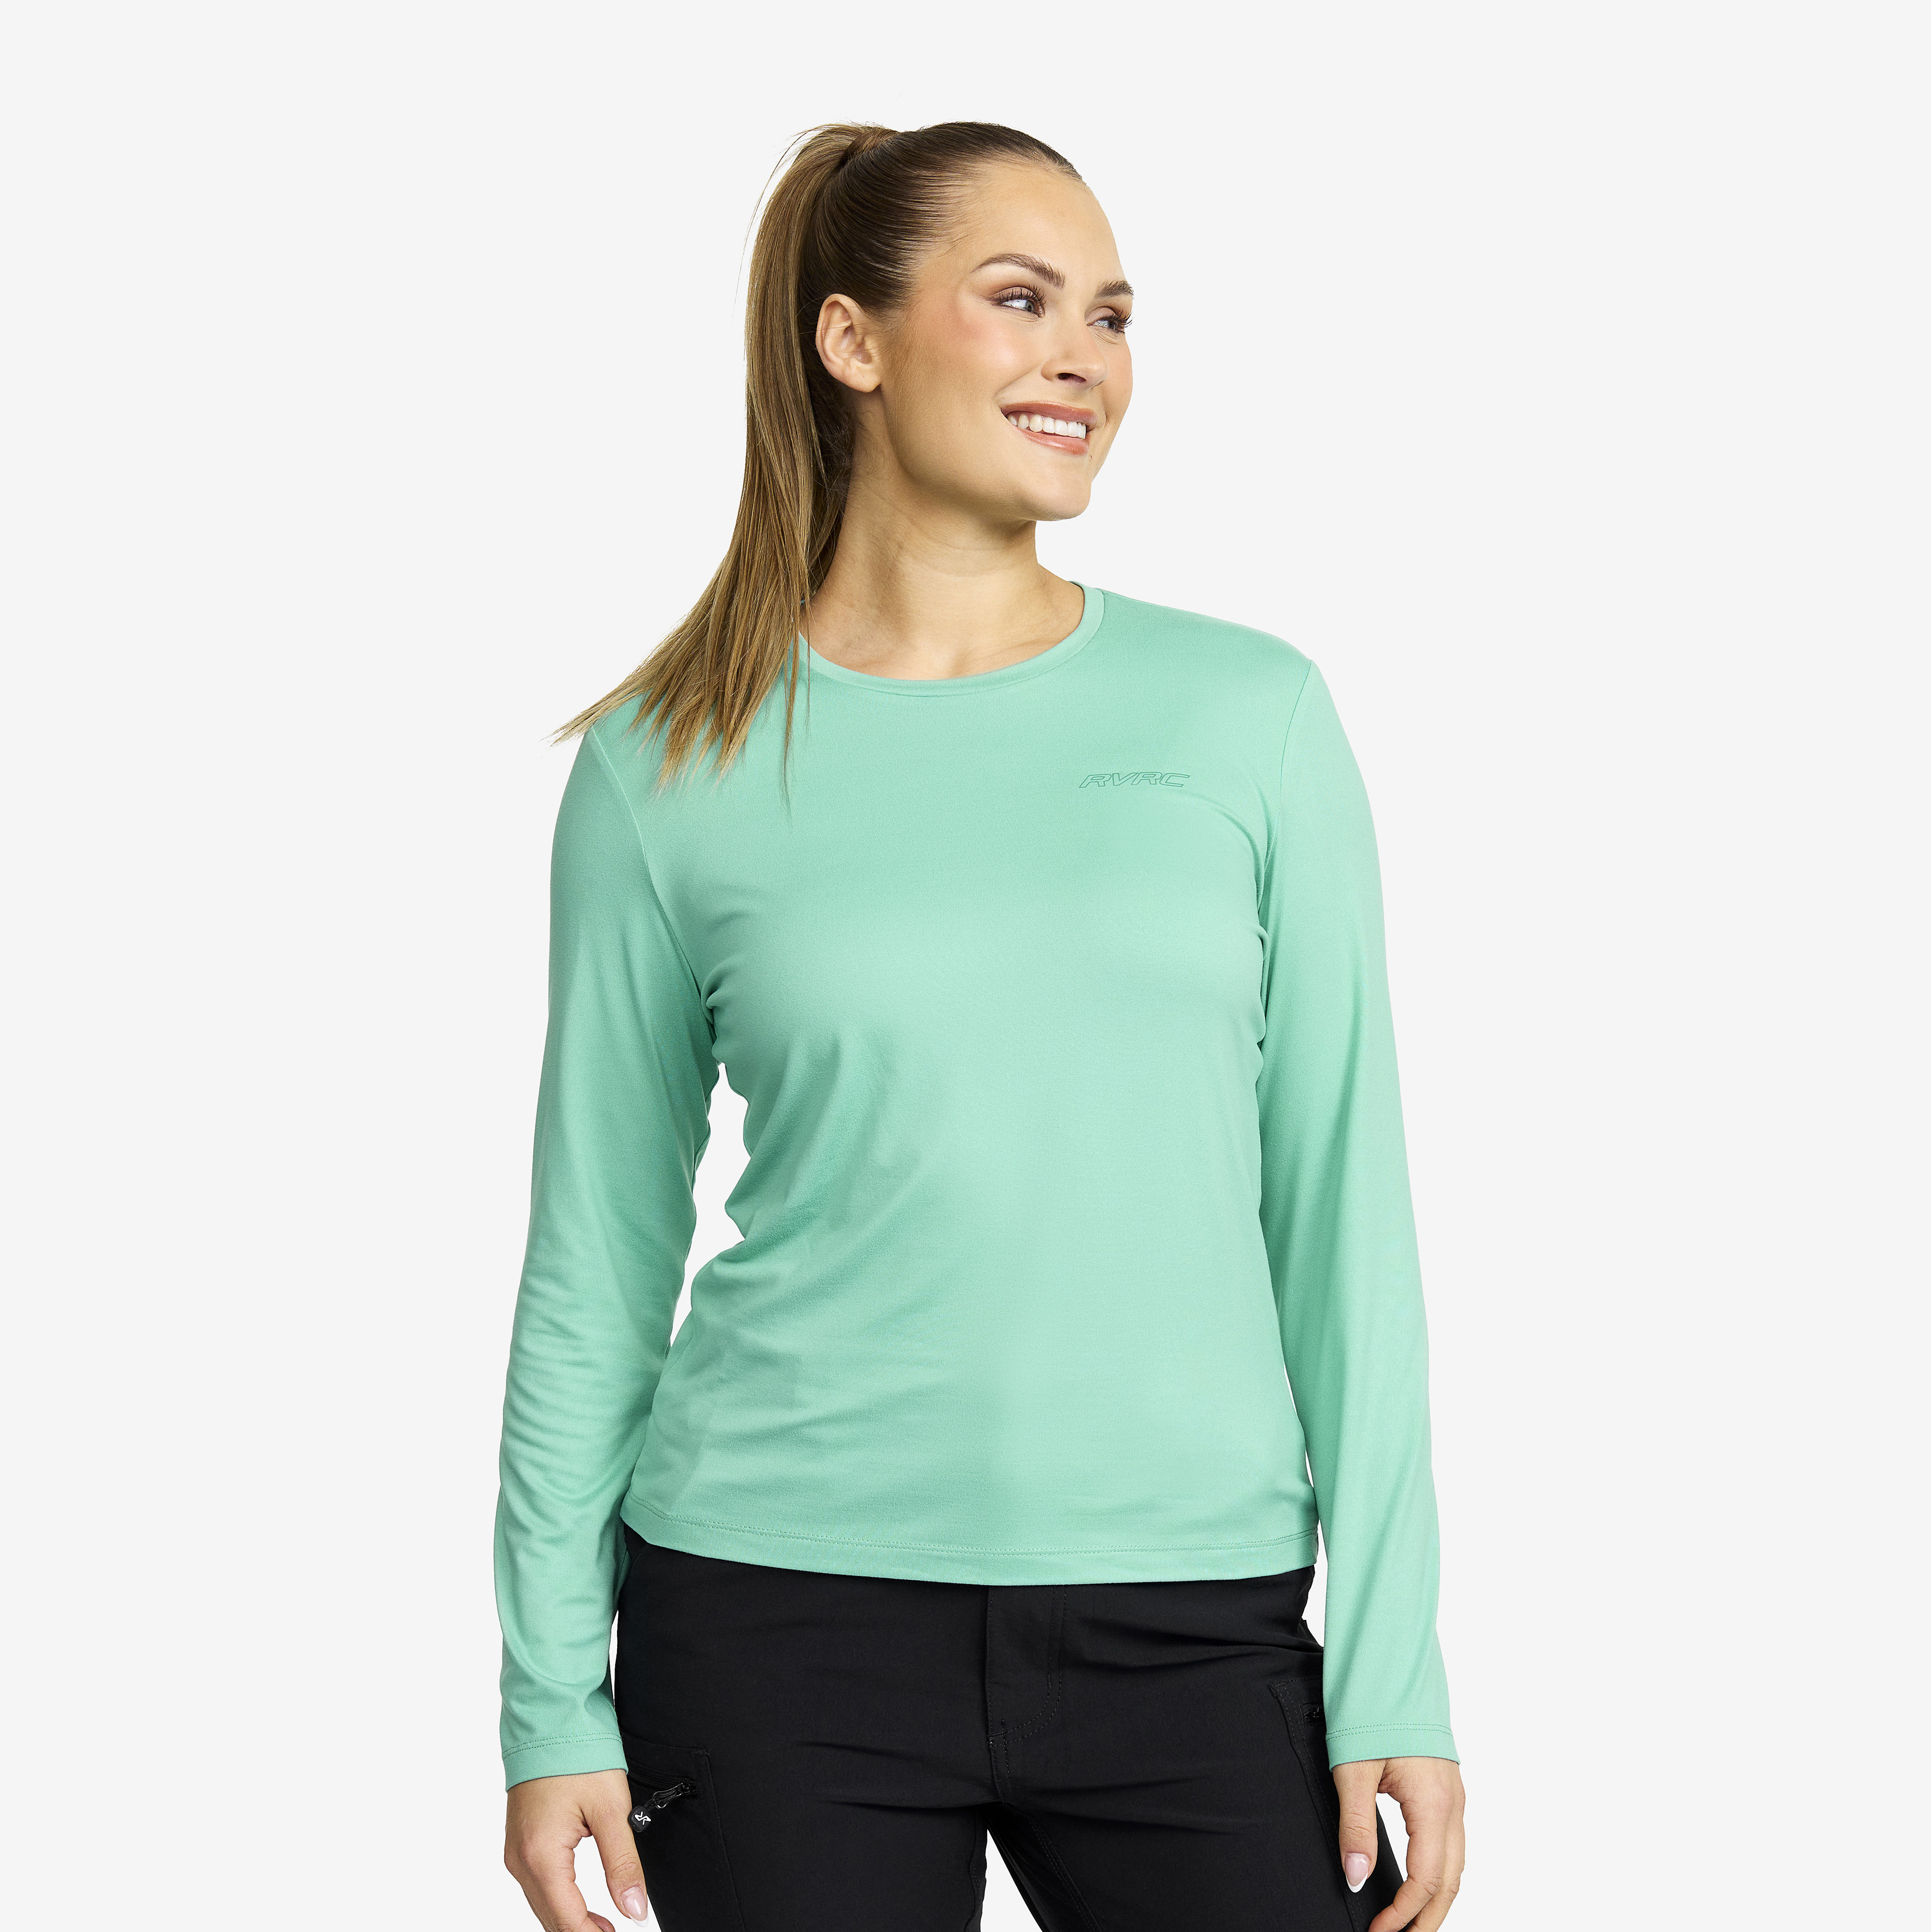 Mission Long-sleeved T-shirt Canton Women